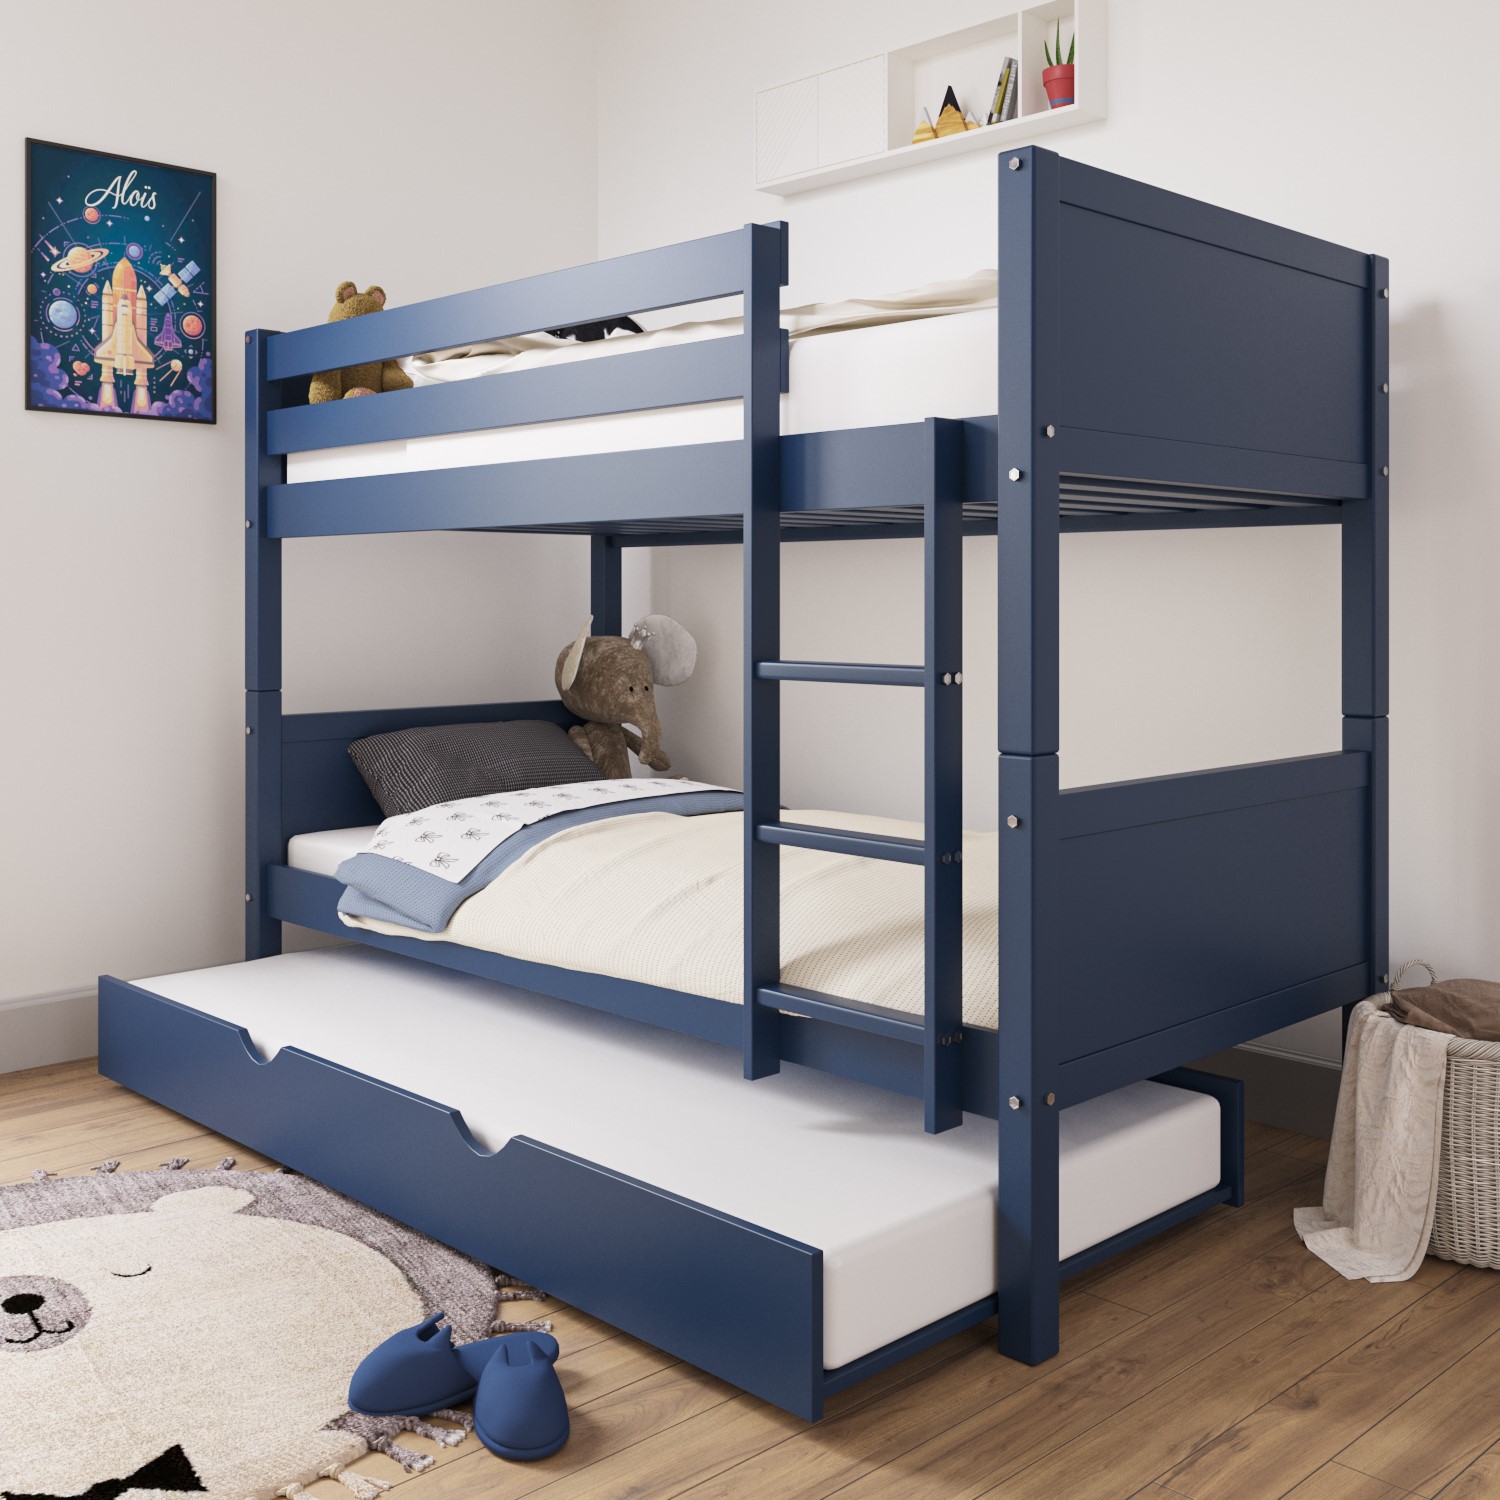 Navy Blue Wooden Bunk Bed With Trundle, Slide Out Bunk Bed